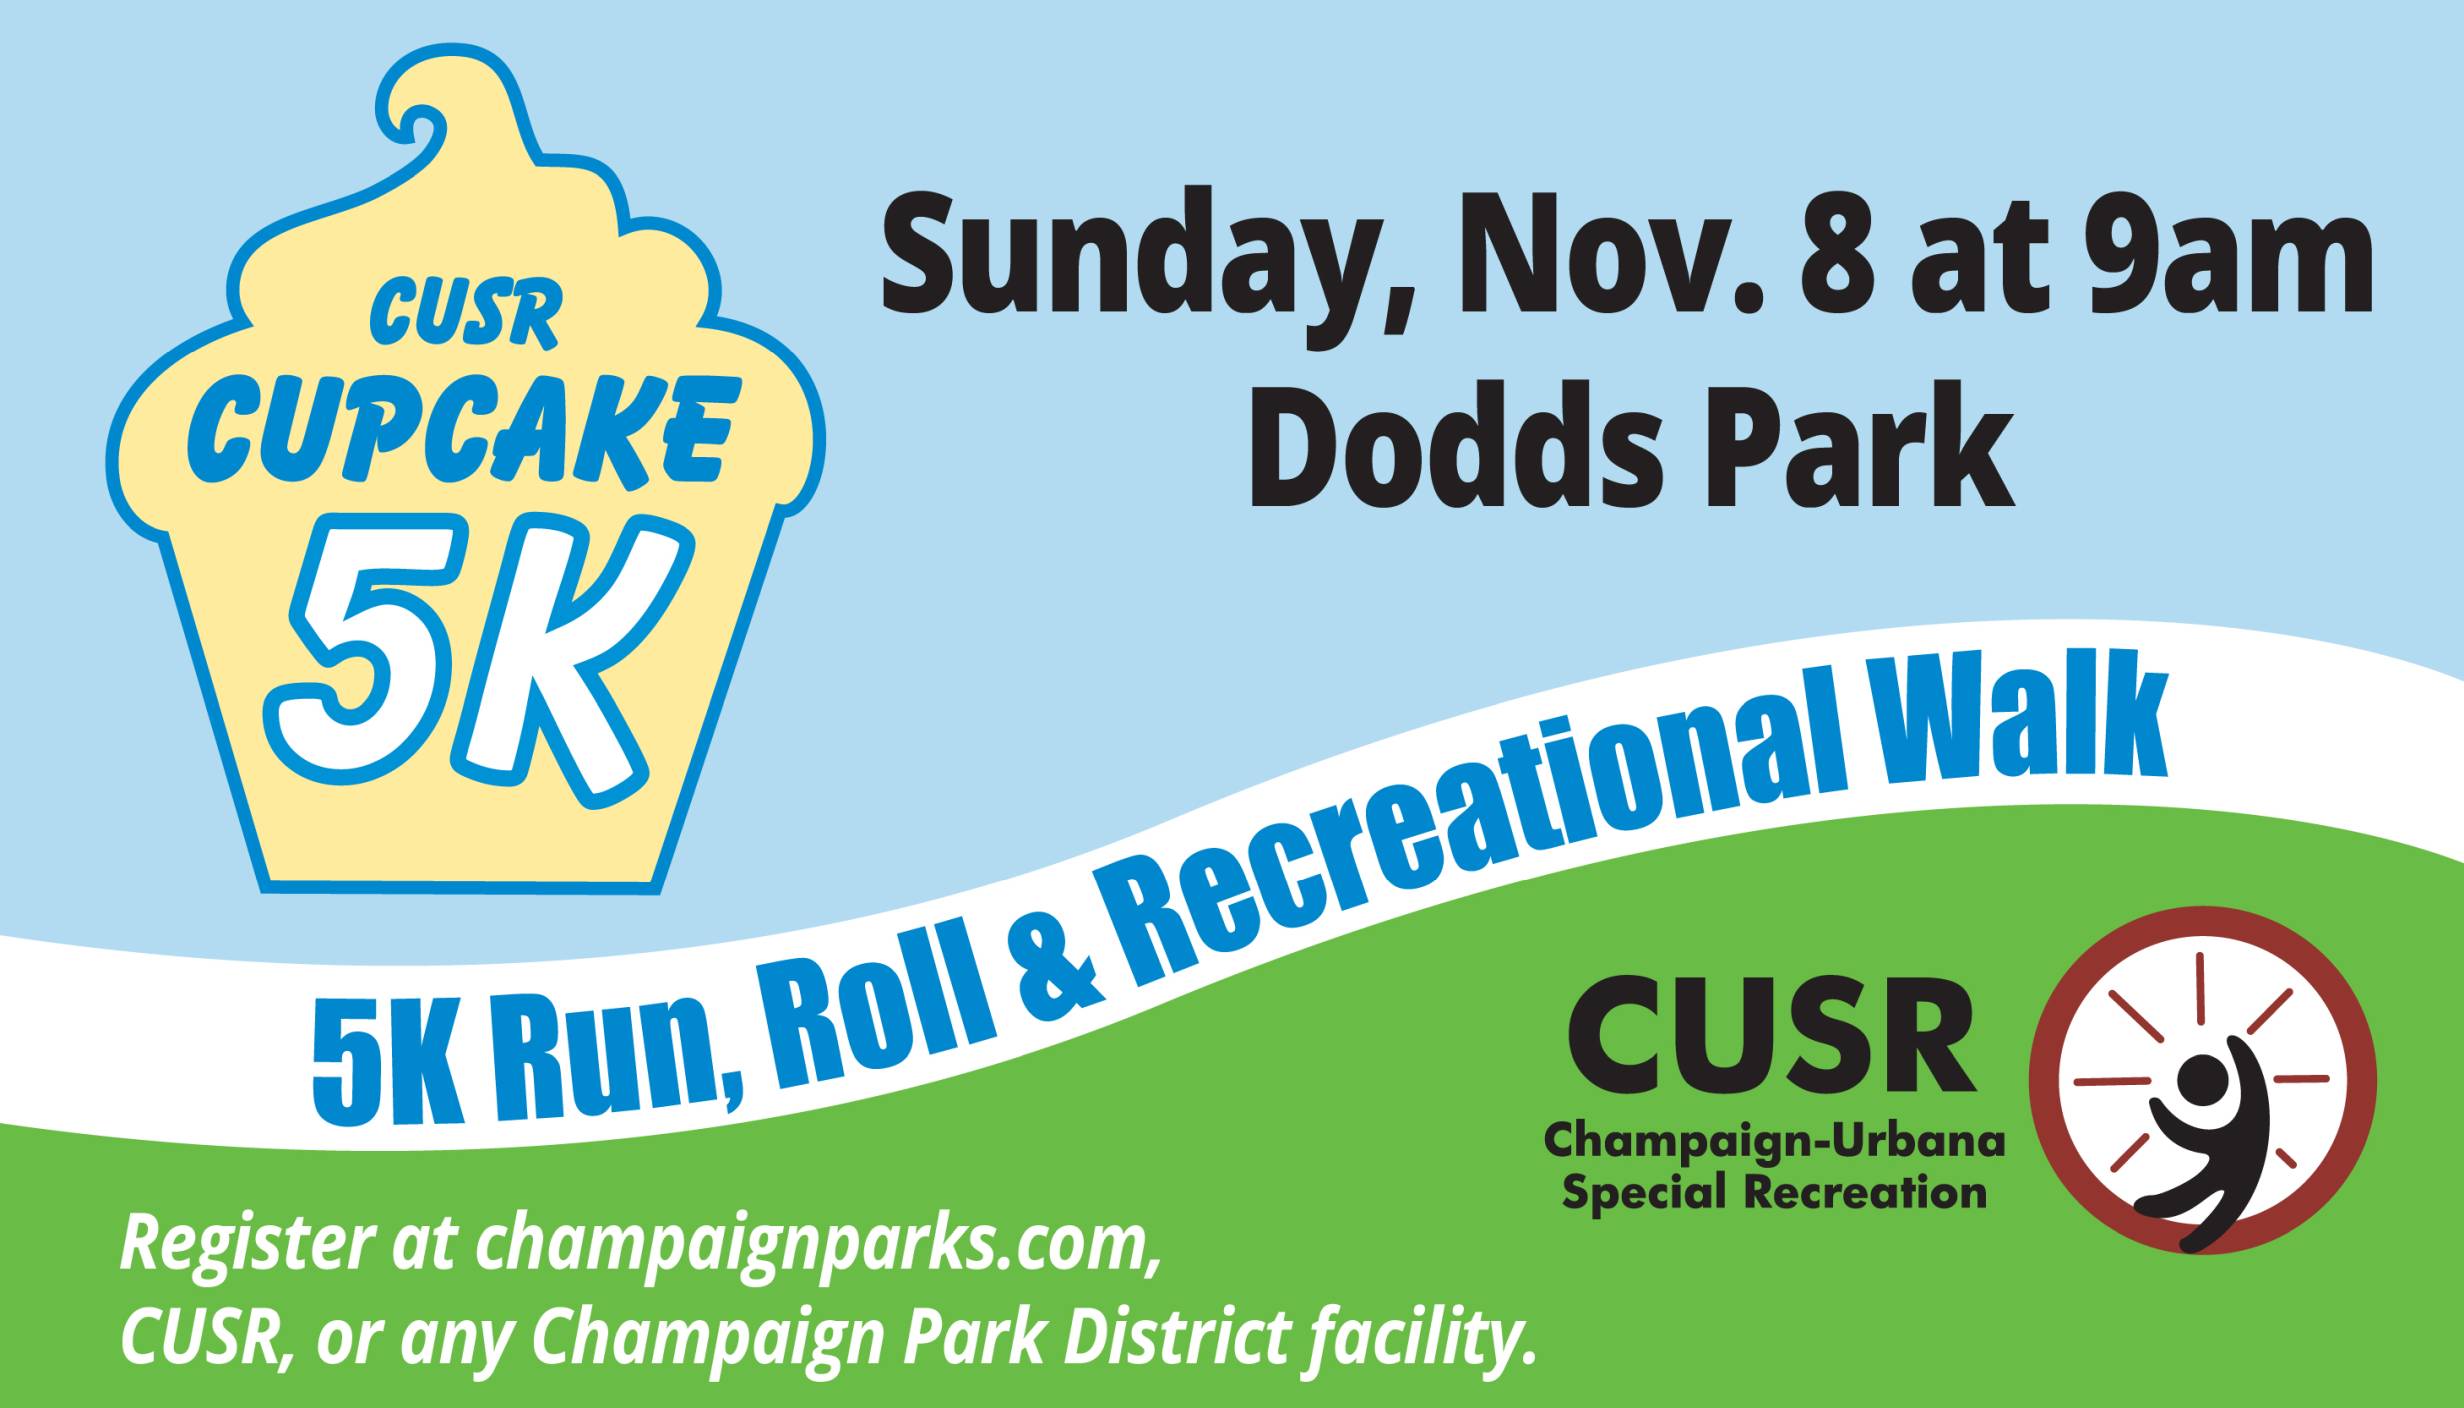 Champaign Park District hosting CUSR Cupcake 5K this weekend